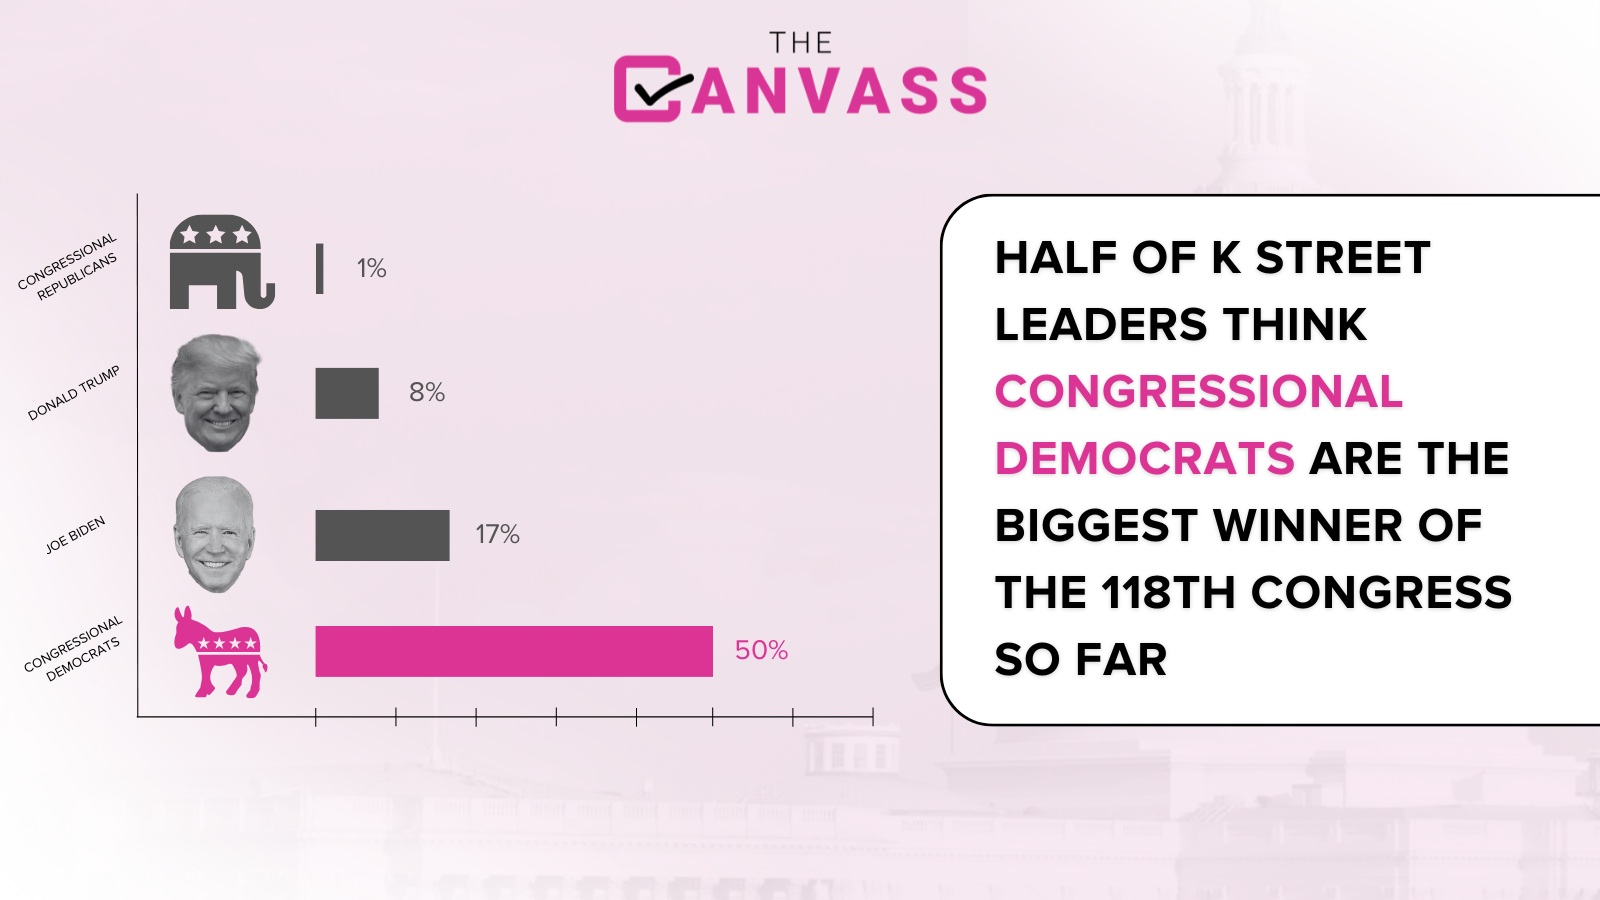 Most K Street leaders say Democrats are the biggest winners so far in the 118th Congress, according to our recent survey.